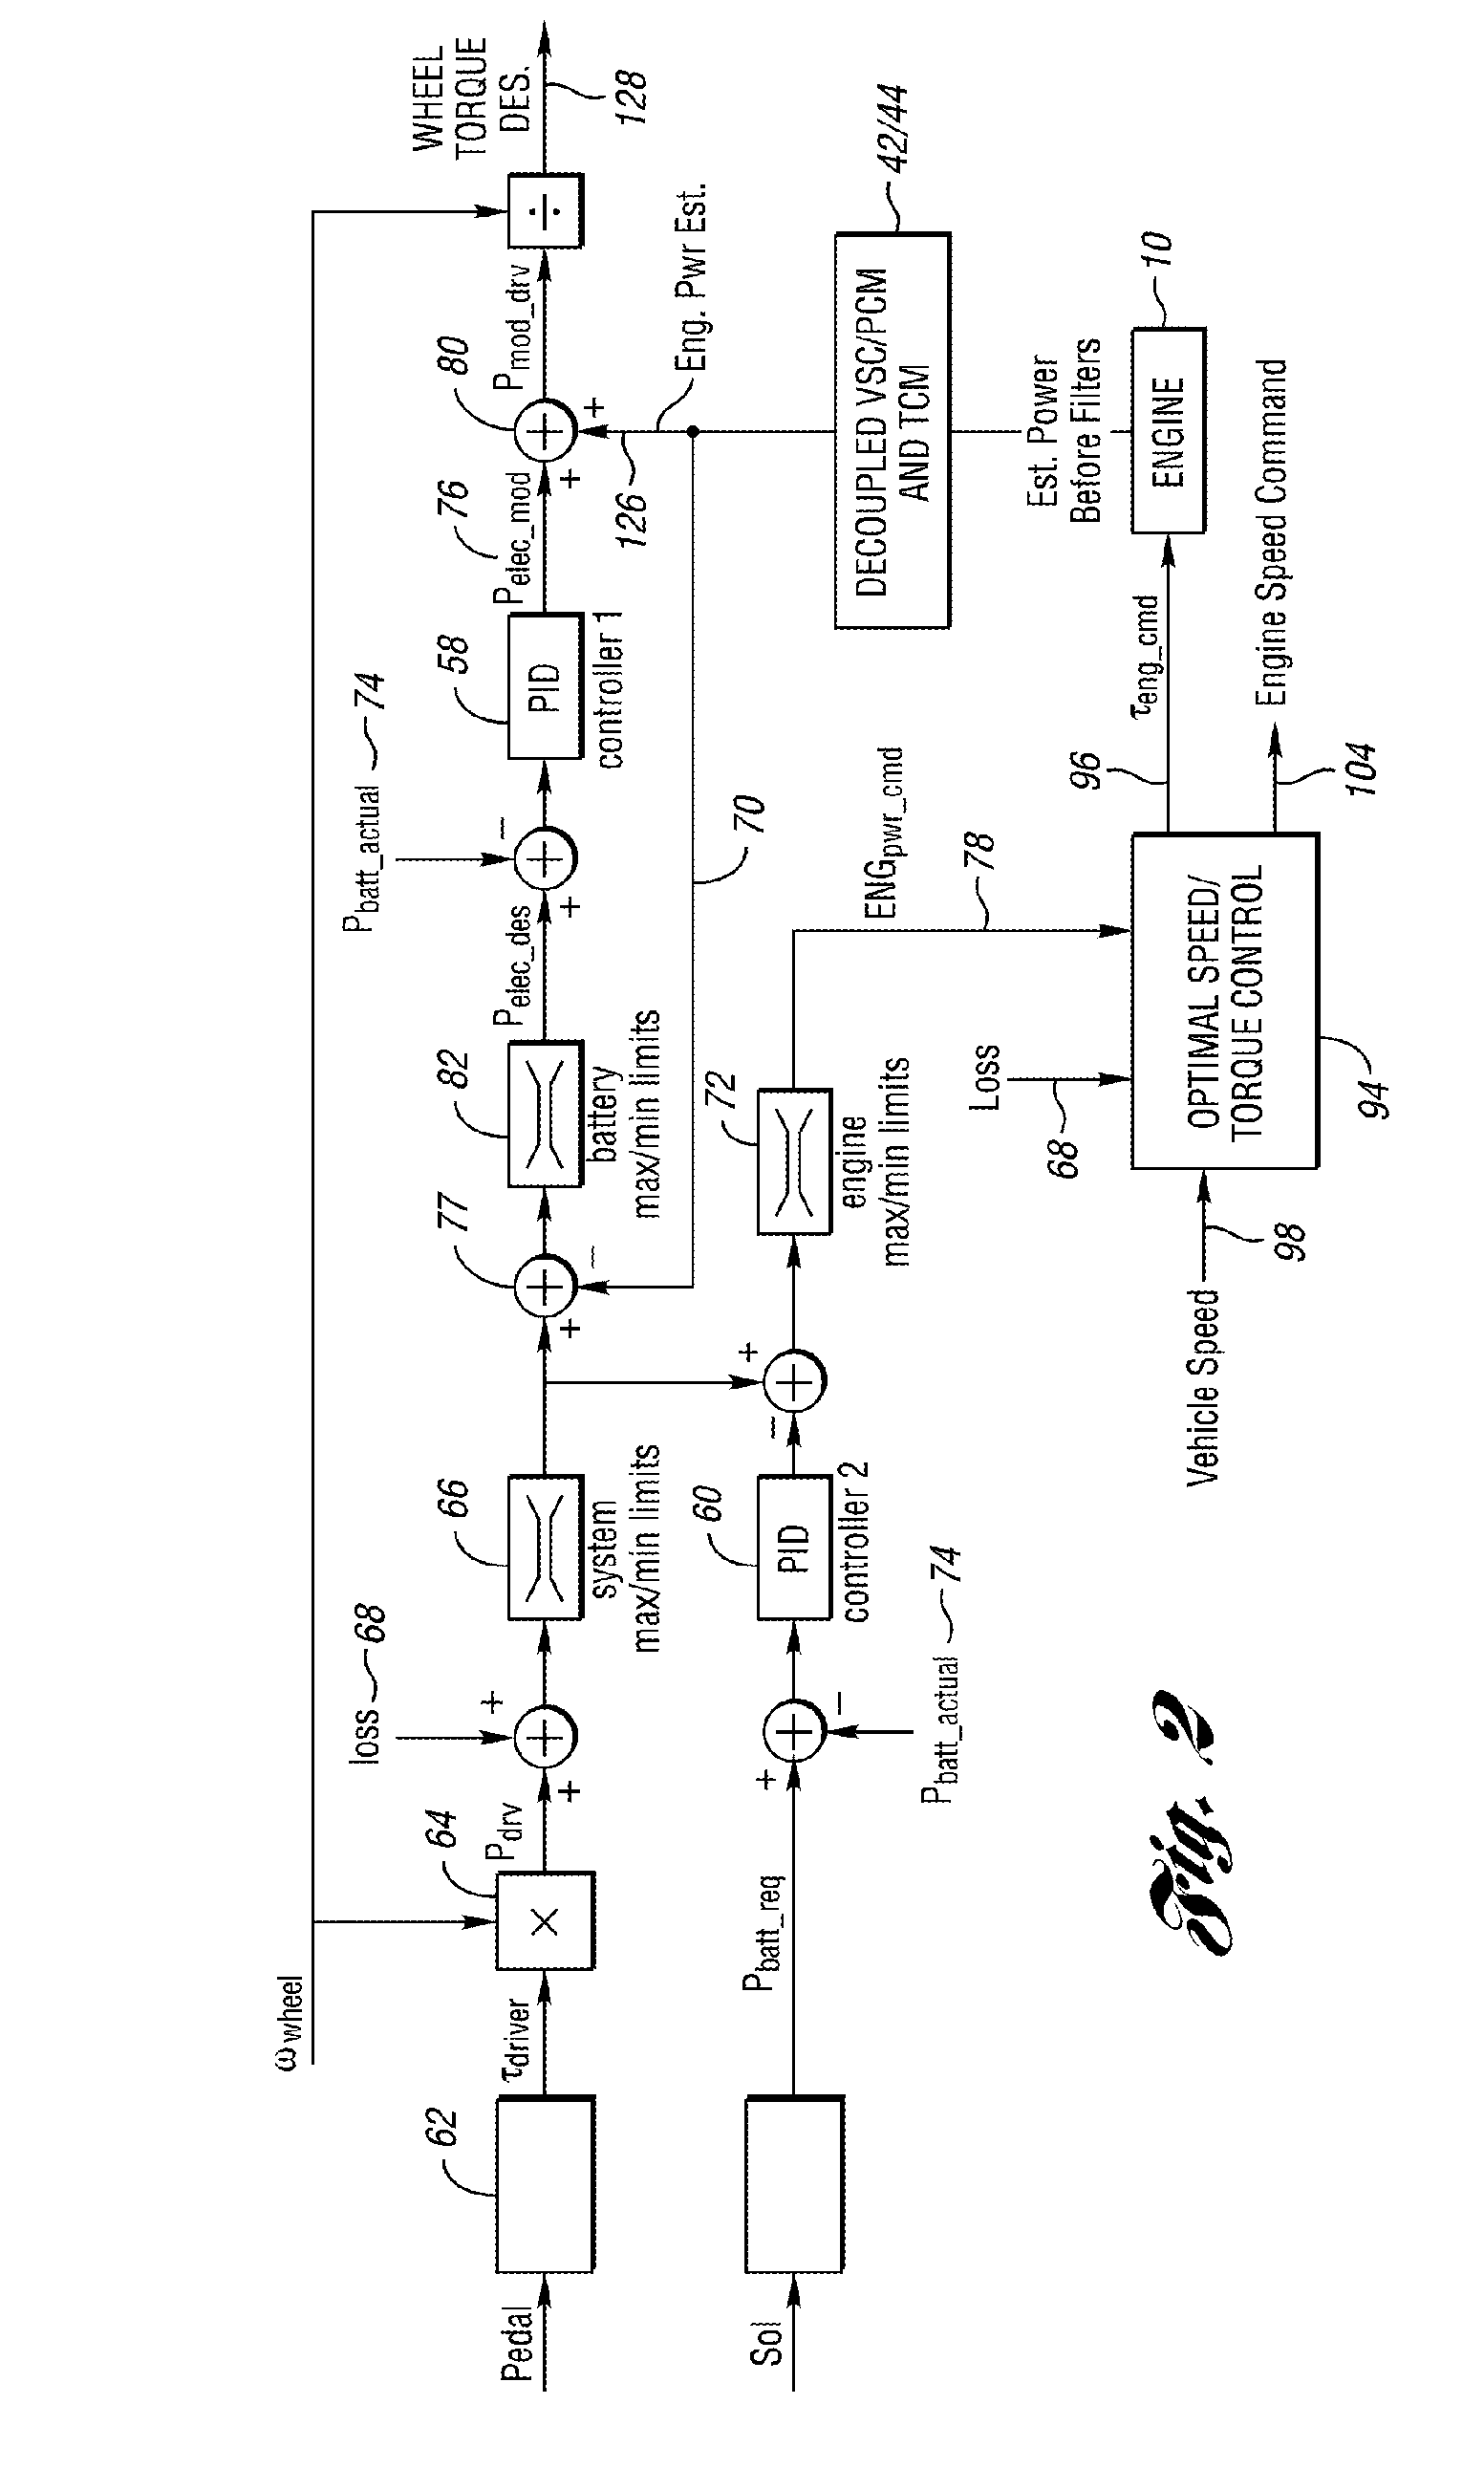 Method for reducing driveline vibration in a hybrid electric vehicle powertrain